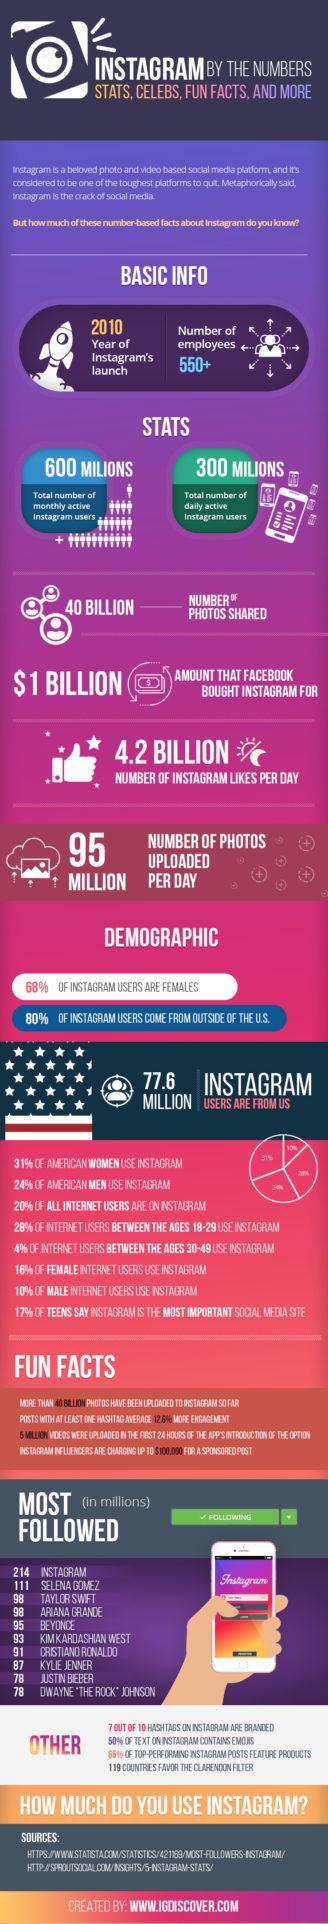 Instagram by the Numbers Stats, Celebs, Fun Facts, and More